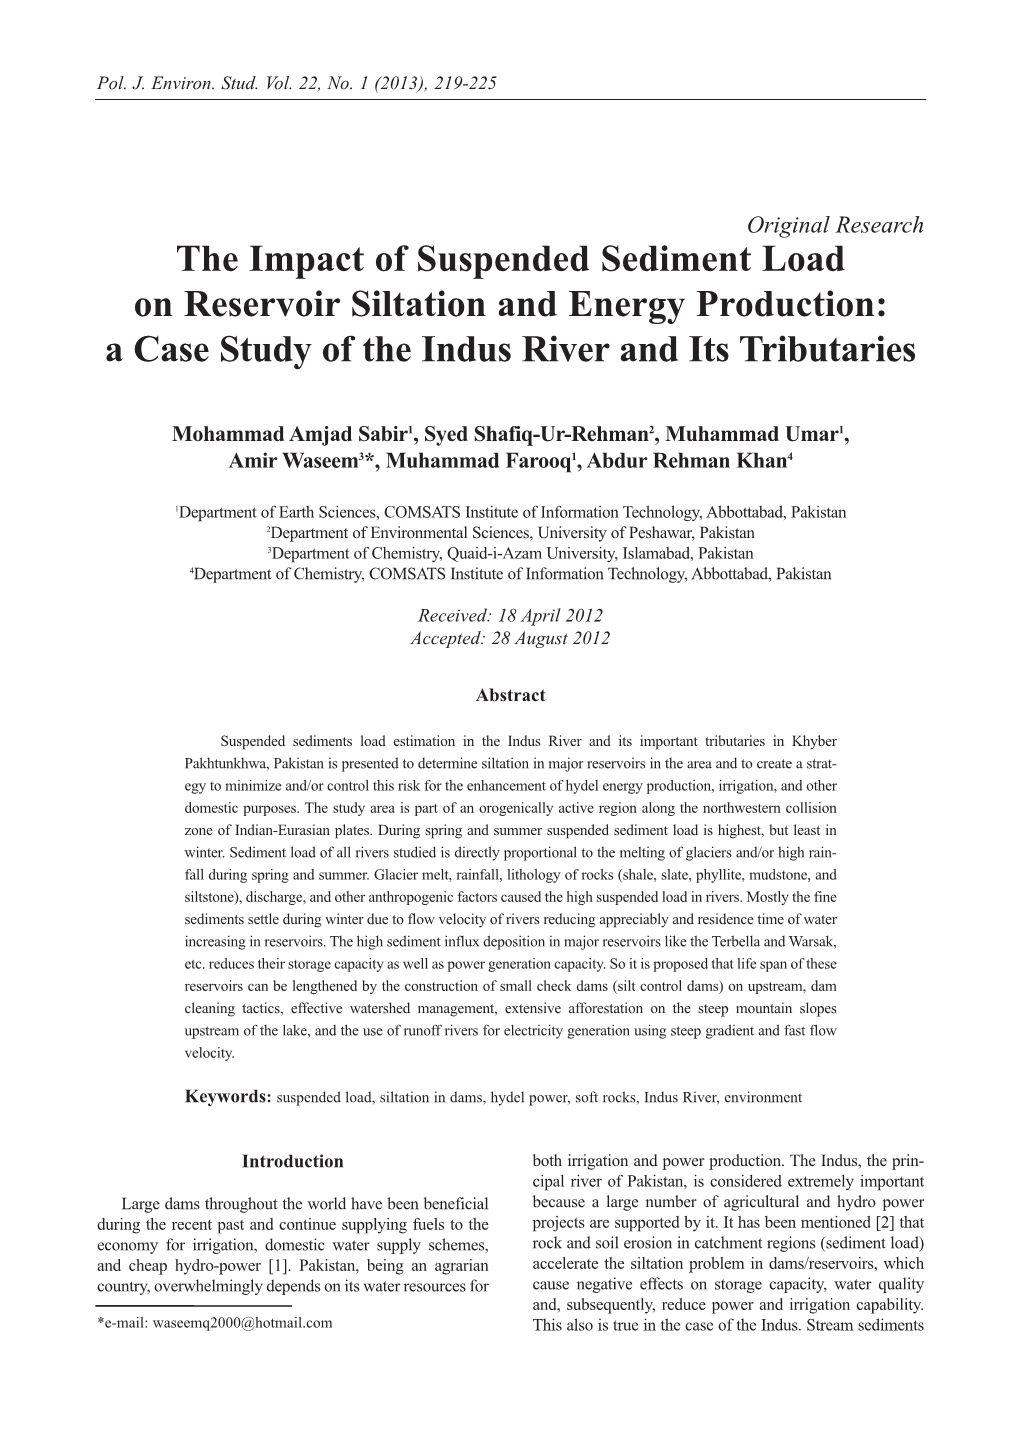 The Impact of Suspended Sediment Load on Reservoir Siltation and Energy Production: a Case Study of the Indus River and Its Tributaries